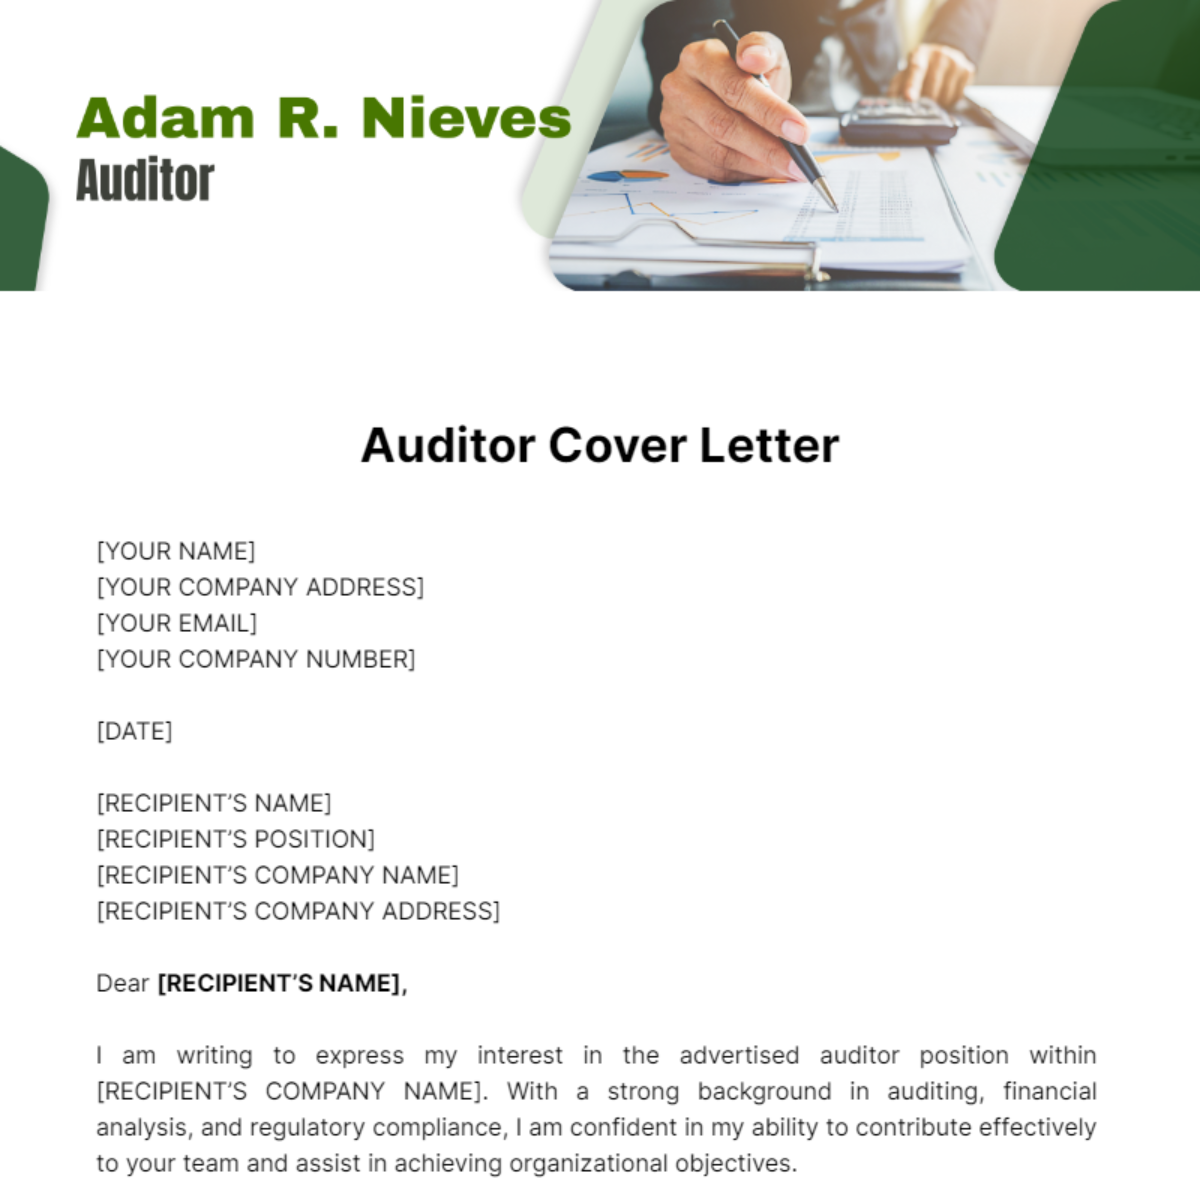 Auditor Cover Letter Template